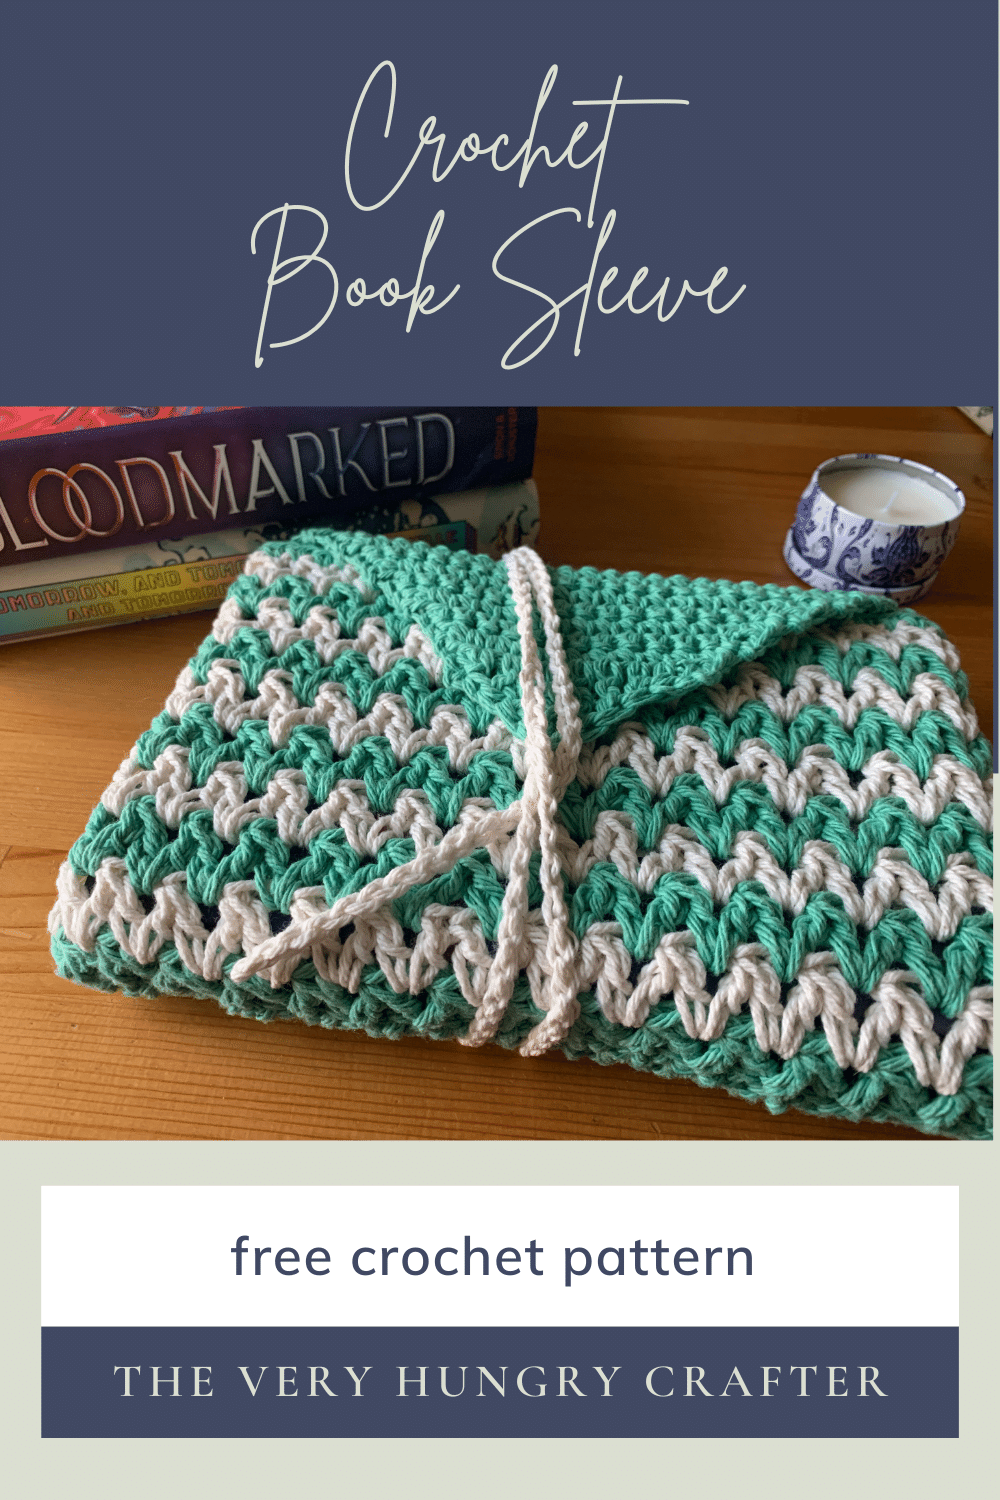 https://www.theveryhungrycrafter.com/wp-content/uploads/2023/01/Crochet-Book-Cover-2.png